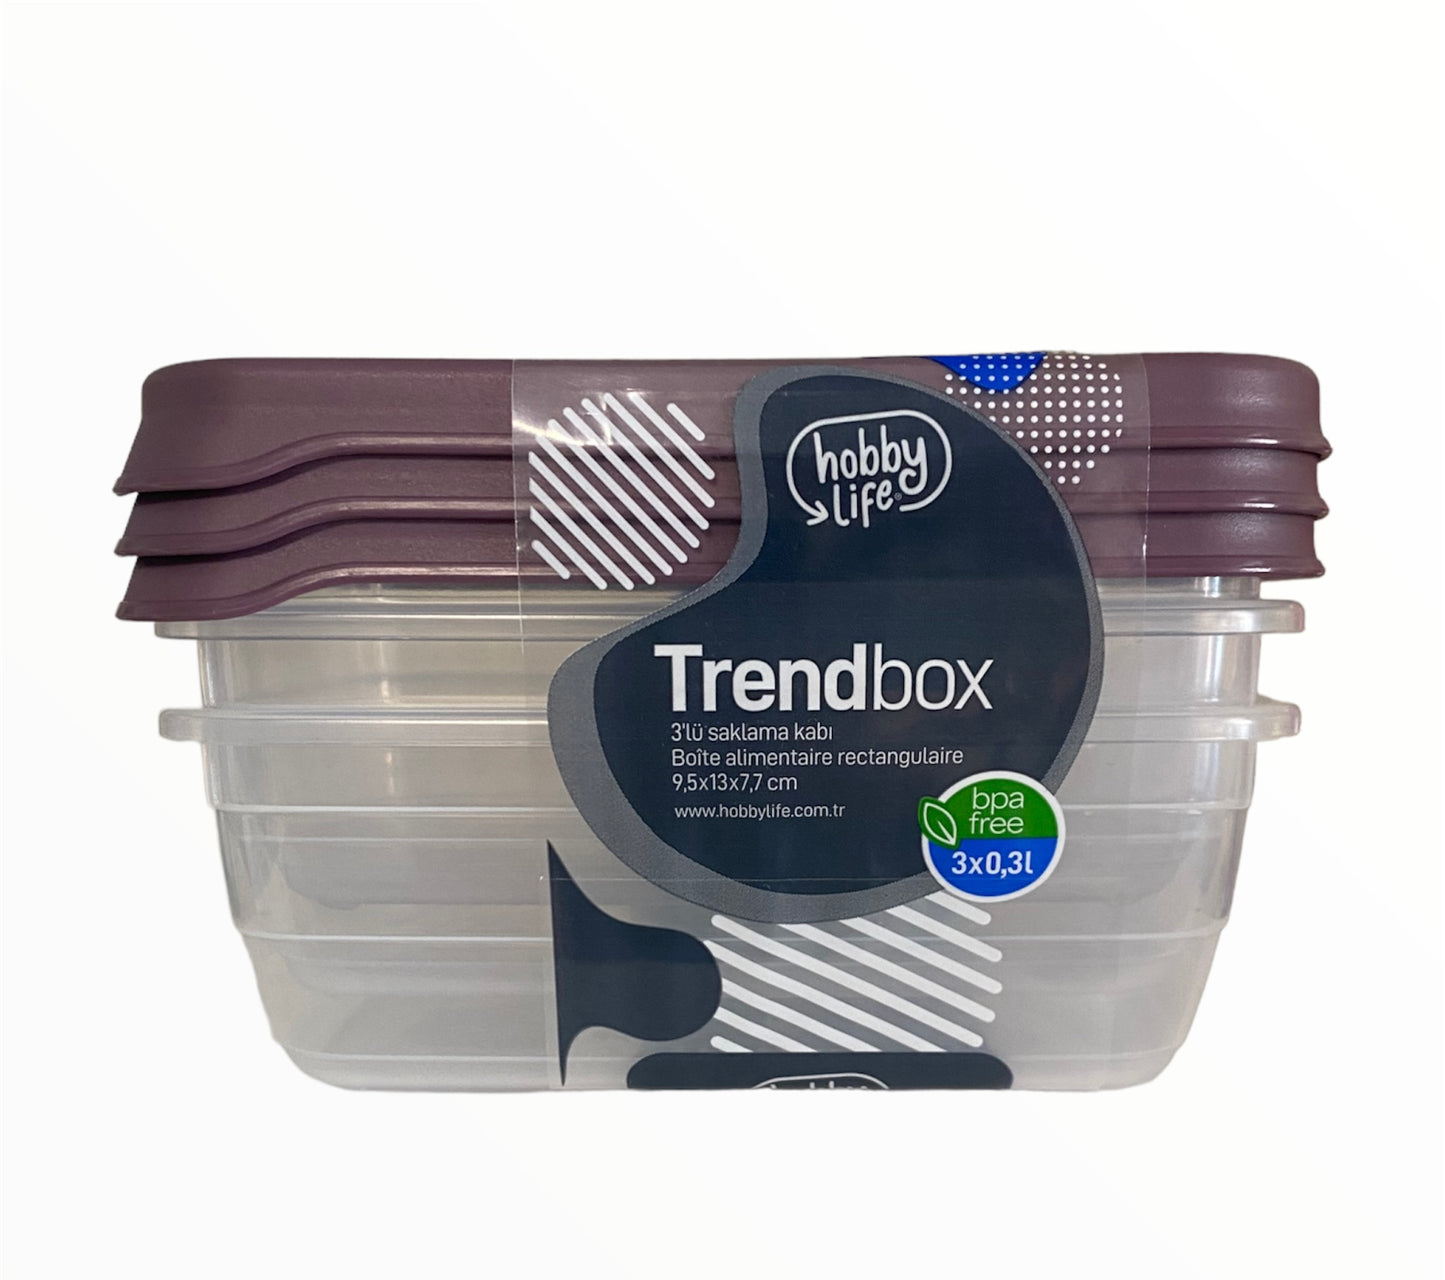 Food storage set of 3 containers